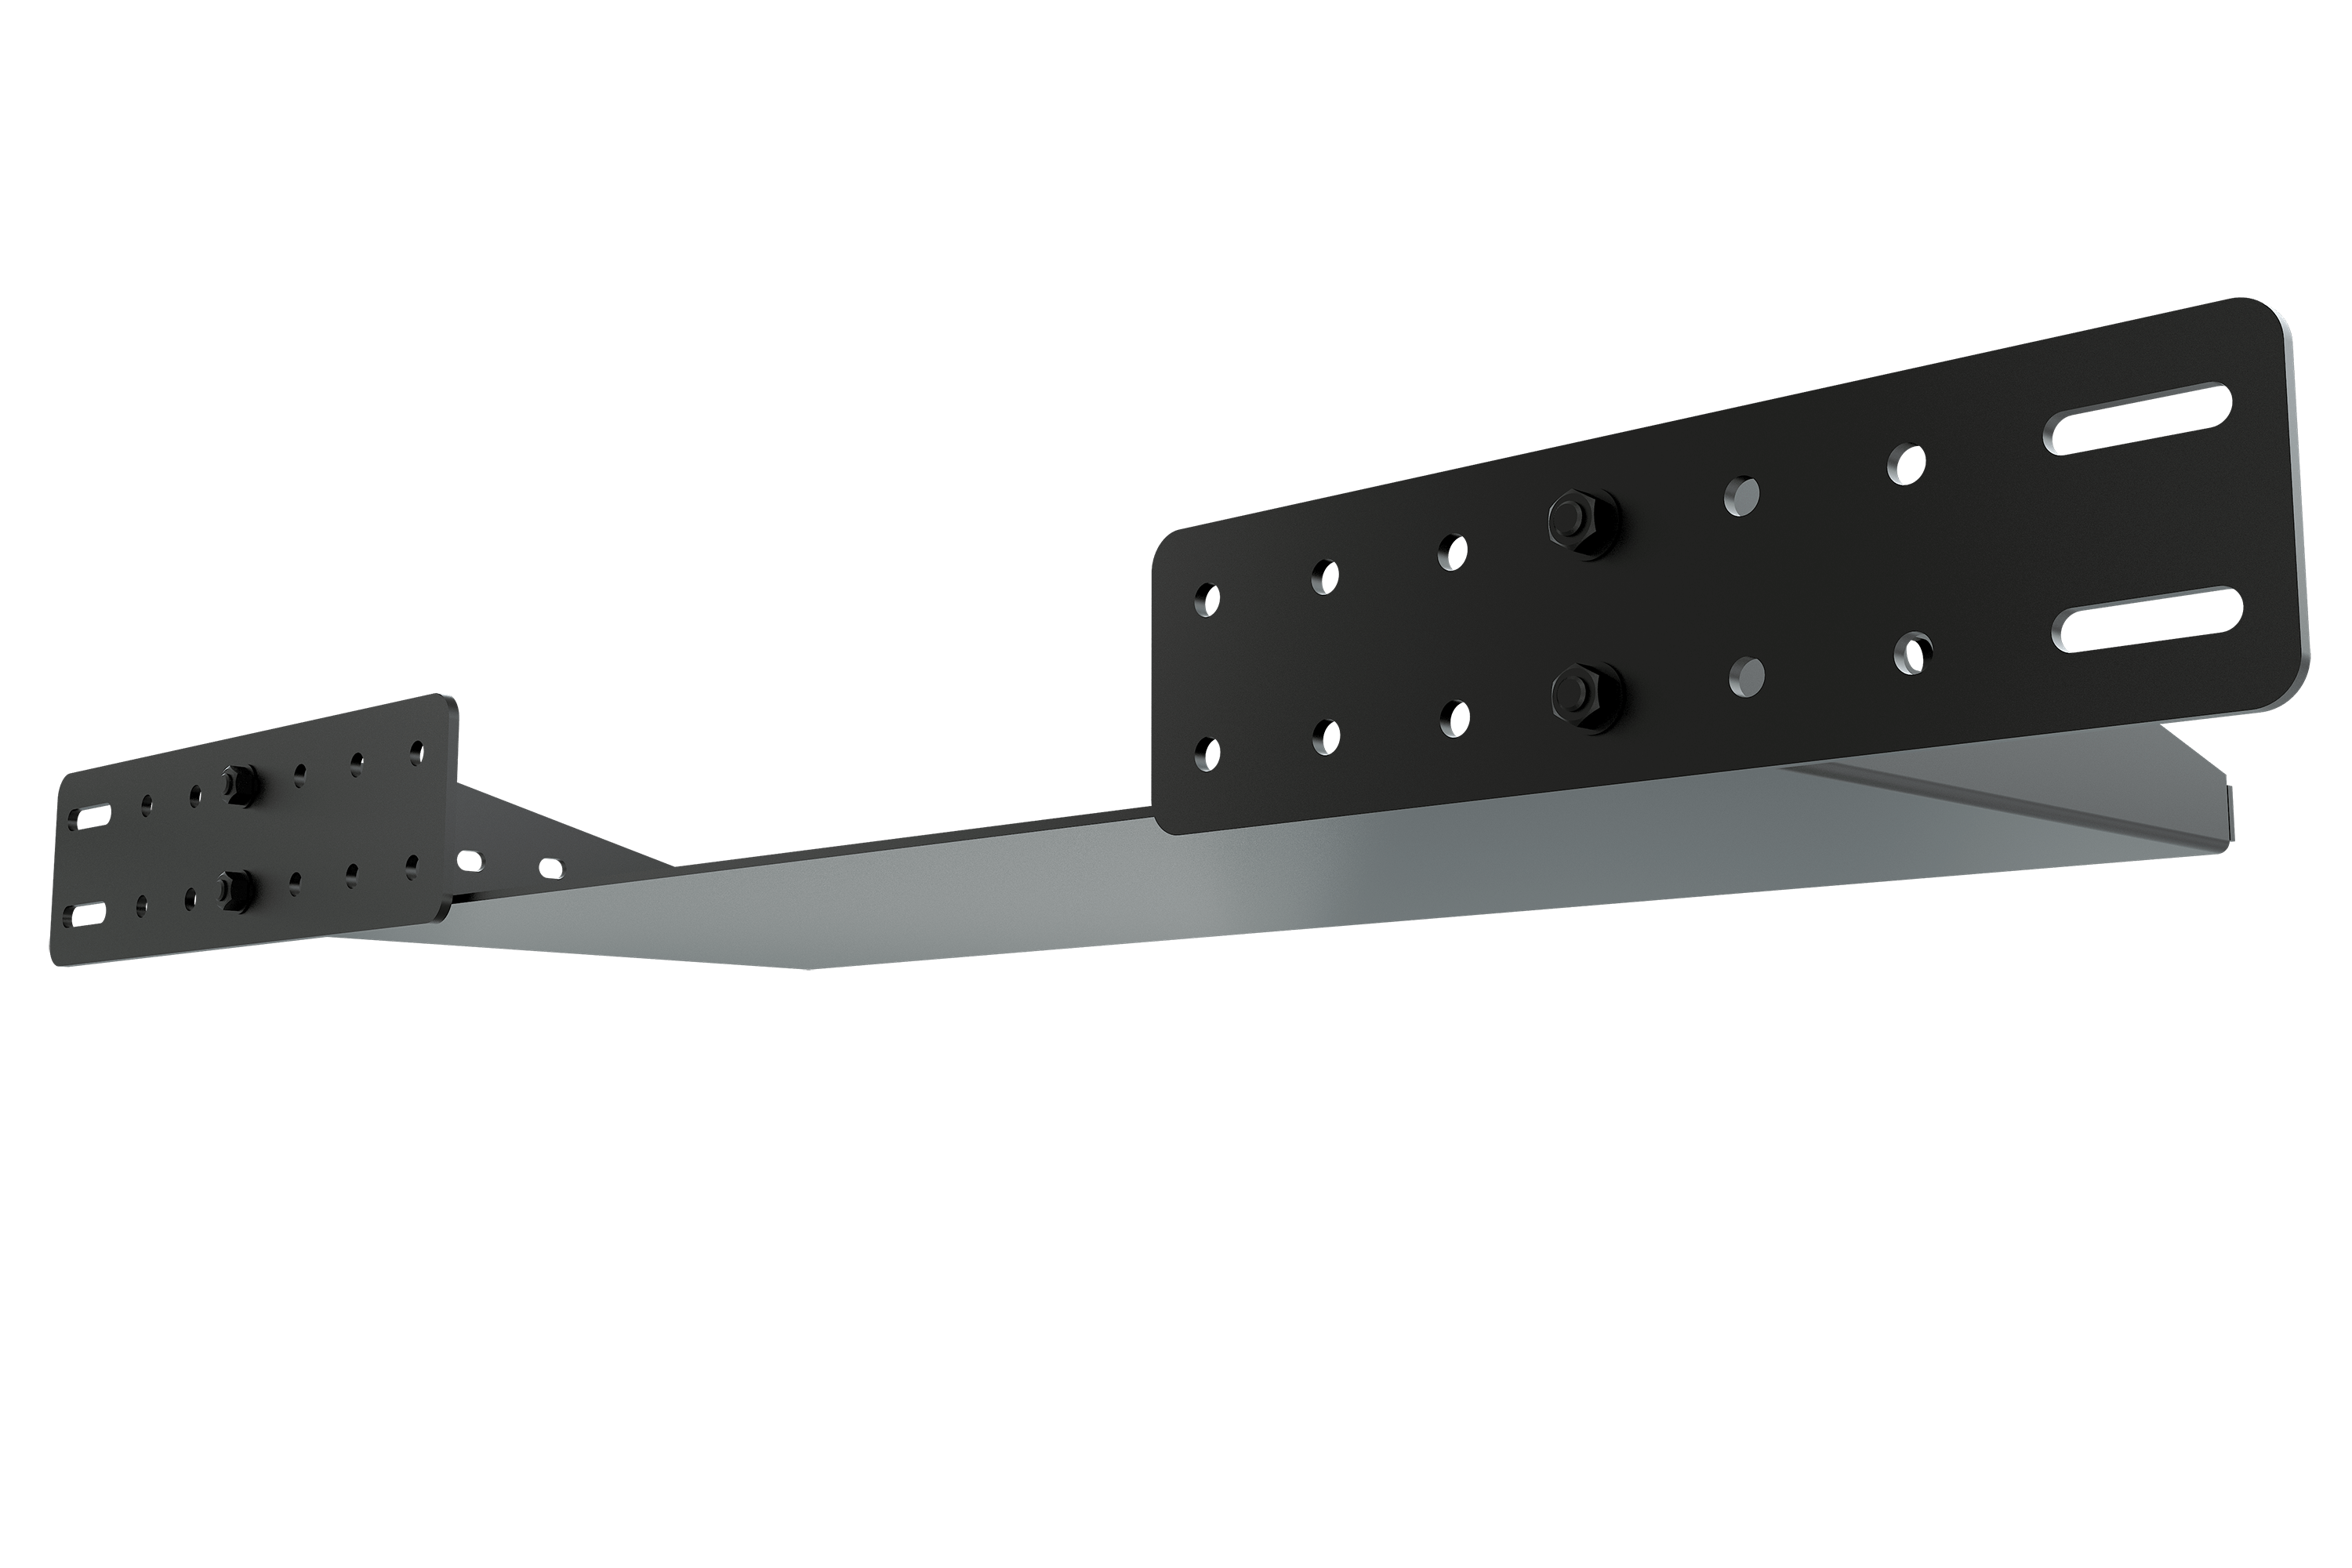 Universal PC or Control Box Shelf for for Aluminium Extrusion Mounting